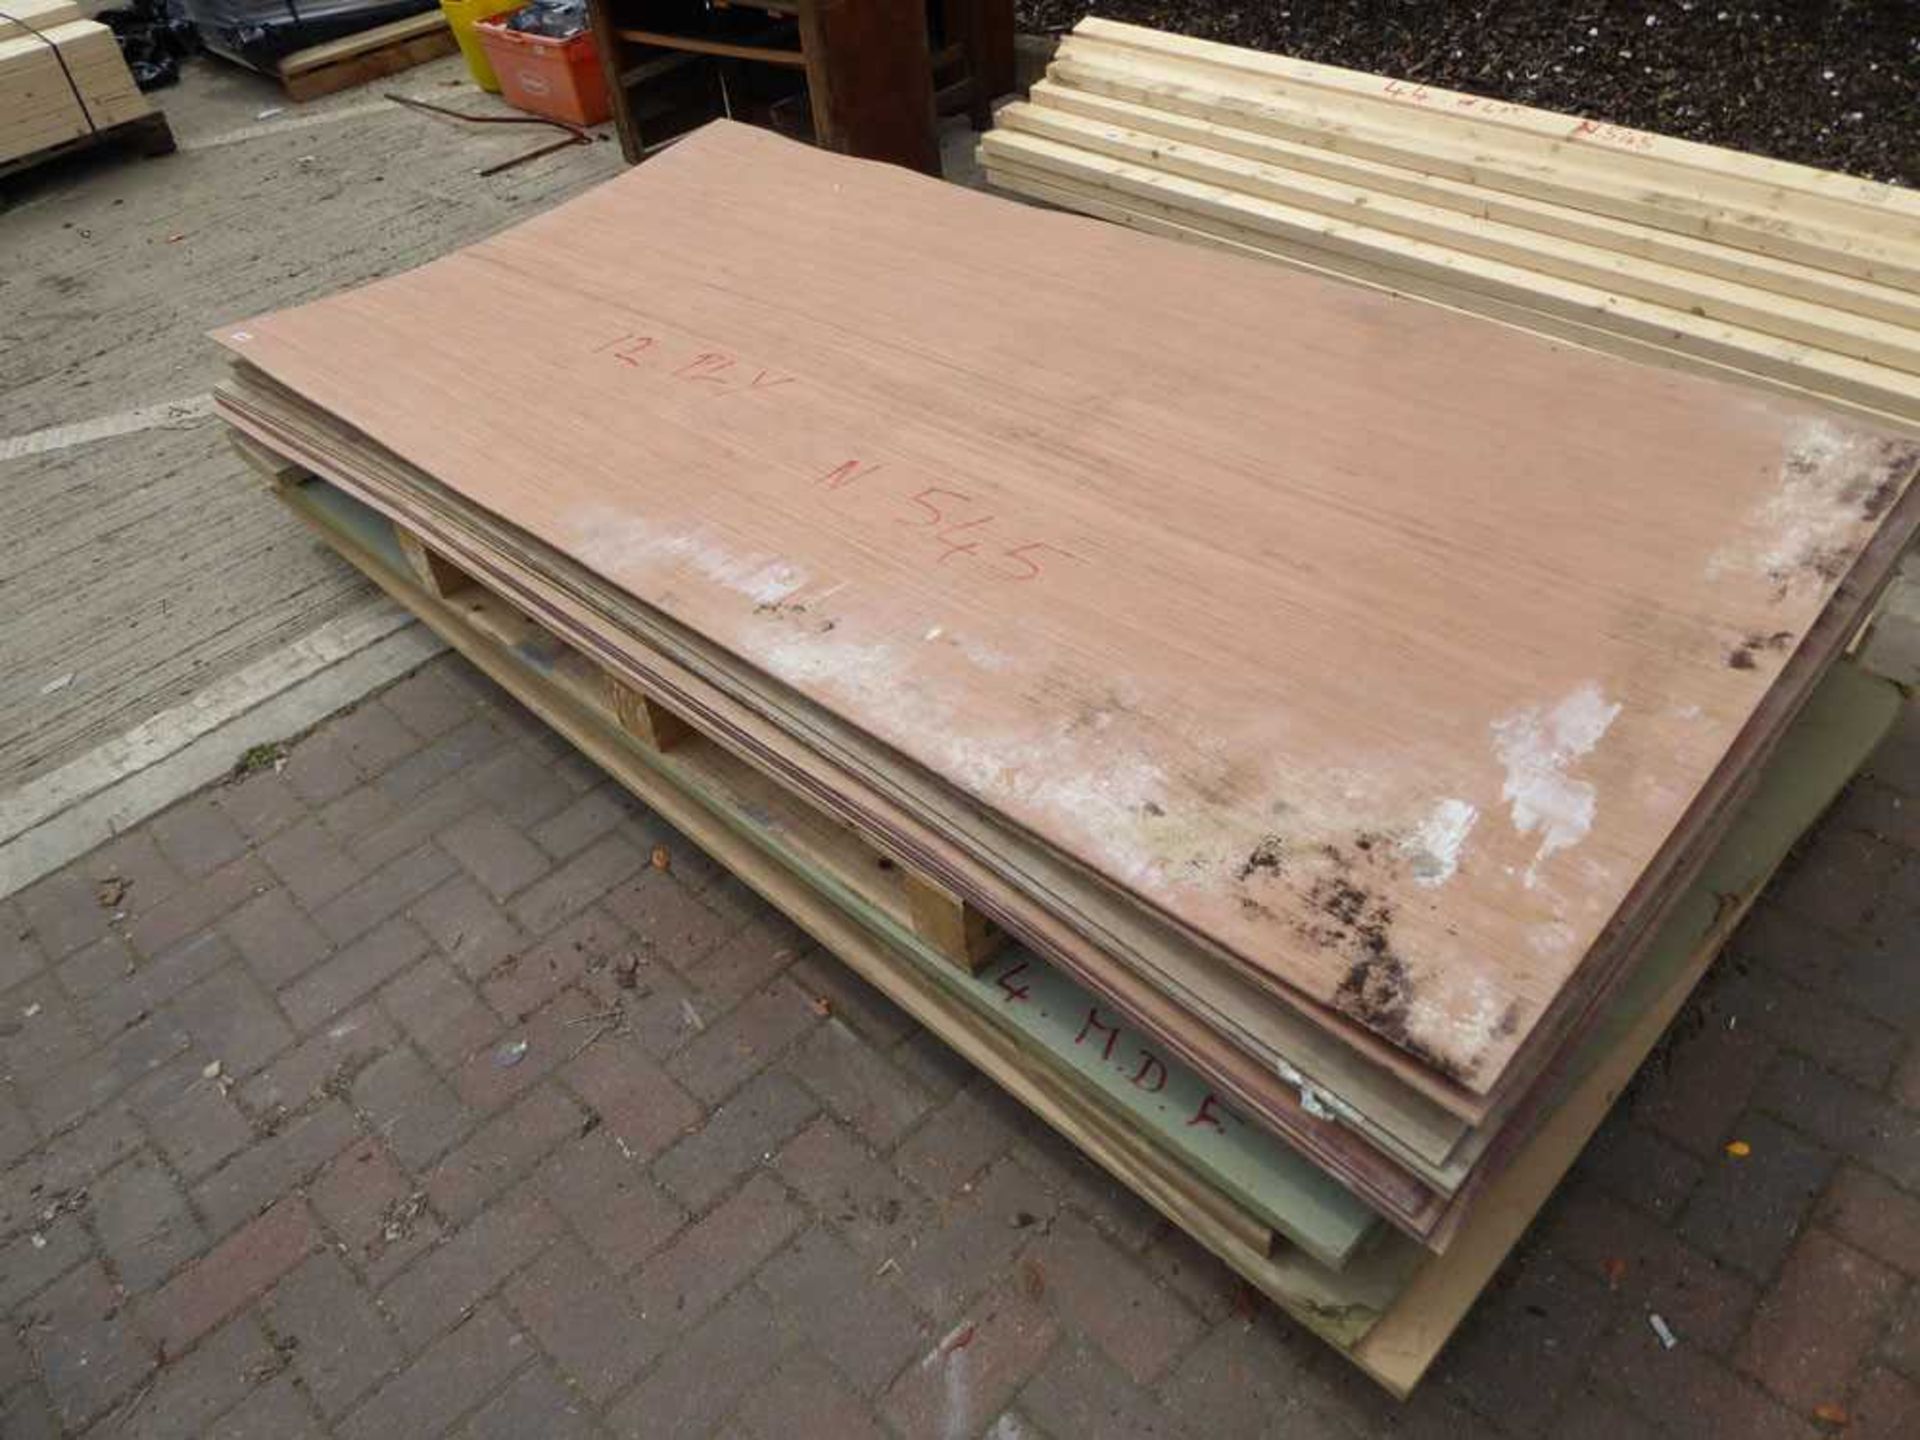 Approx. 12 sheets of ply and MDF board